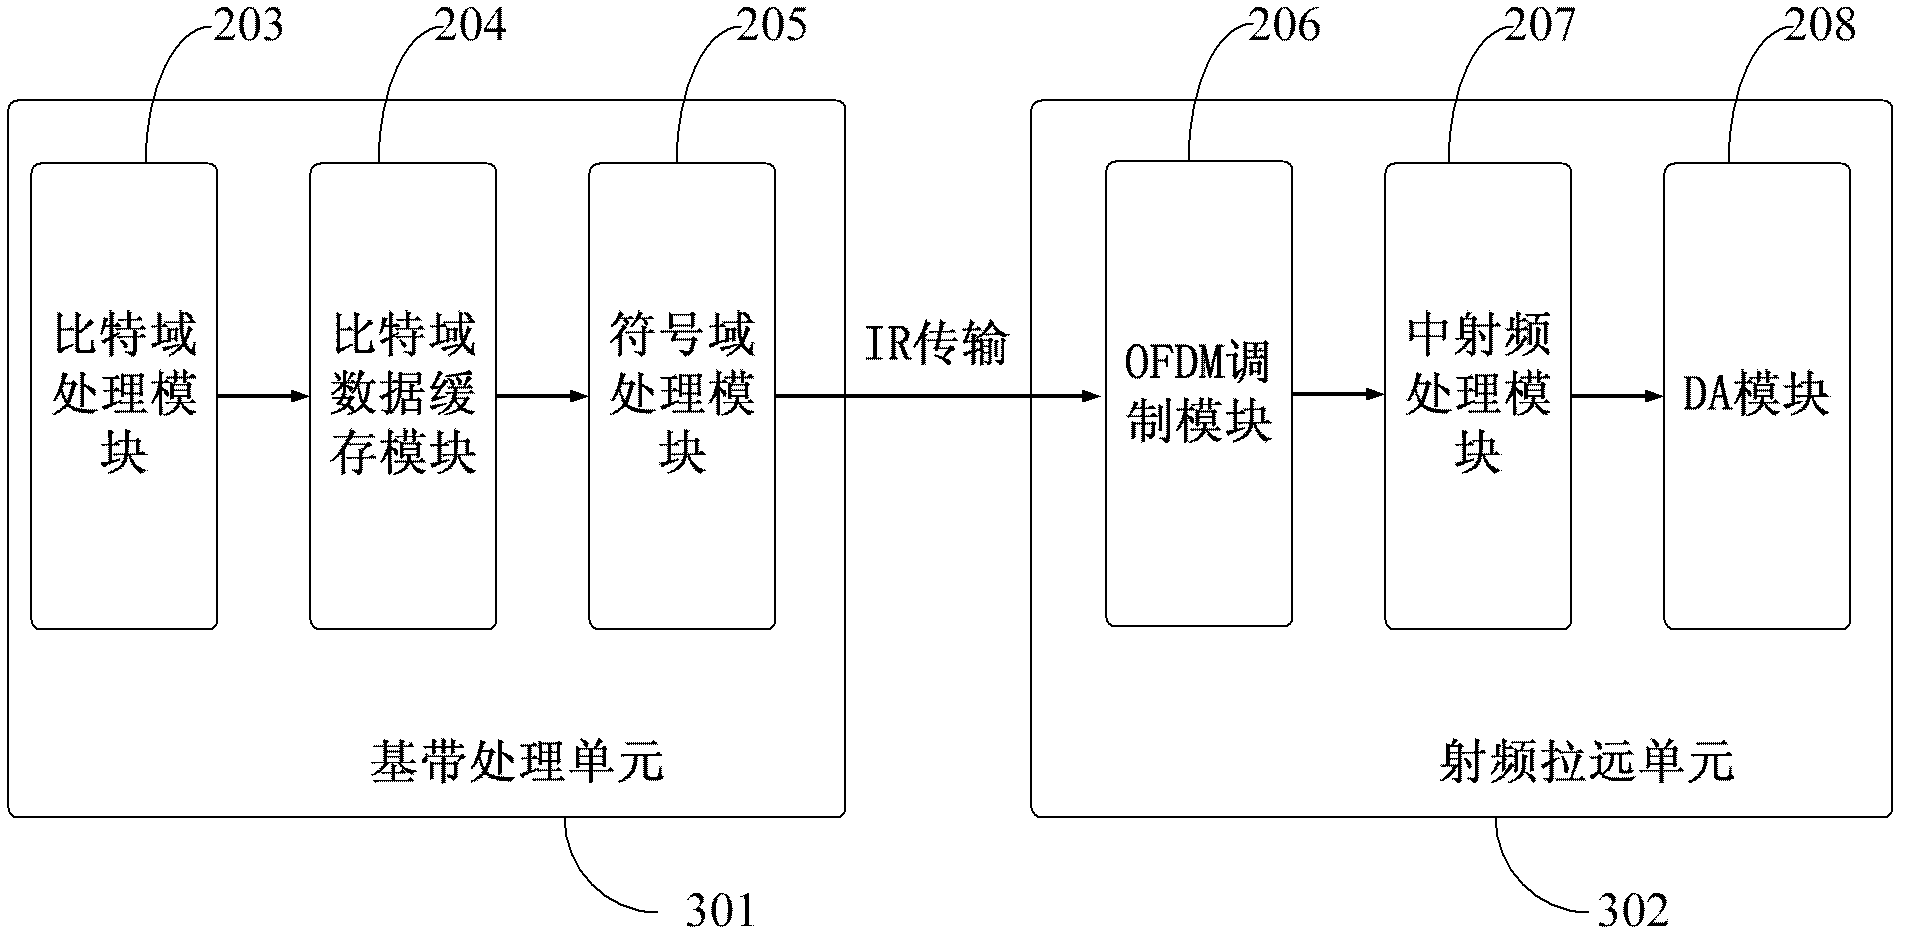 Optical fiber time delay compensation method and device suitable for long term evolution (LTE) system